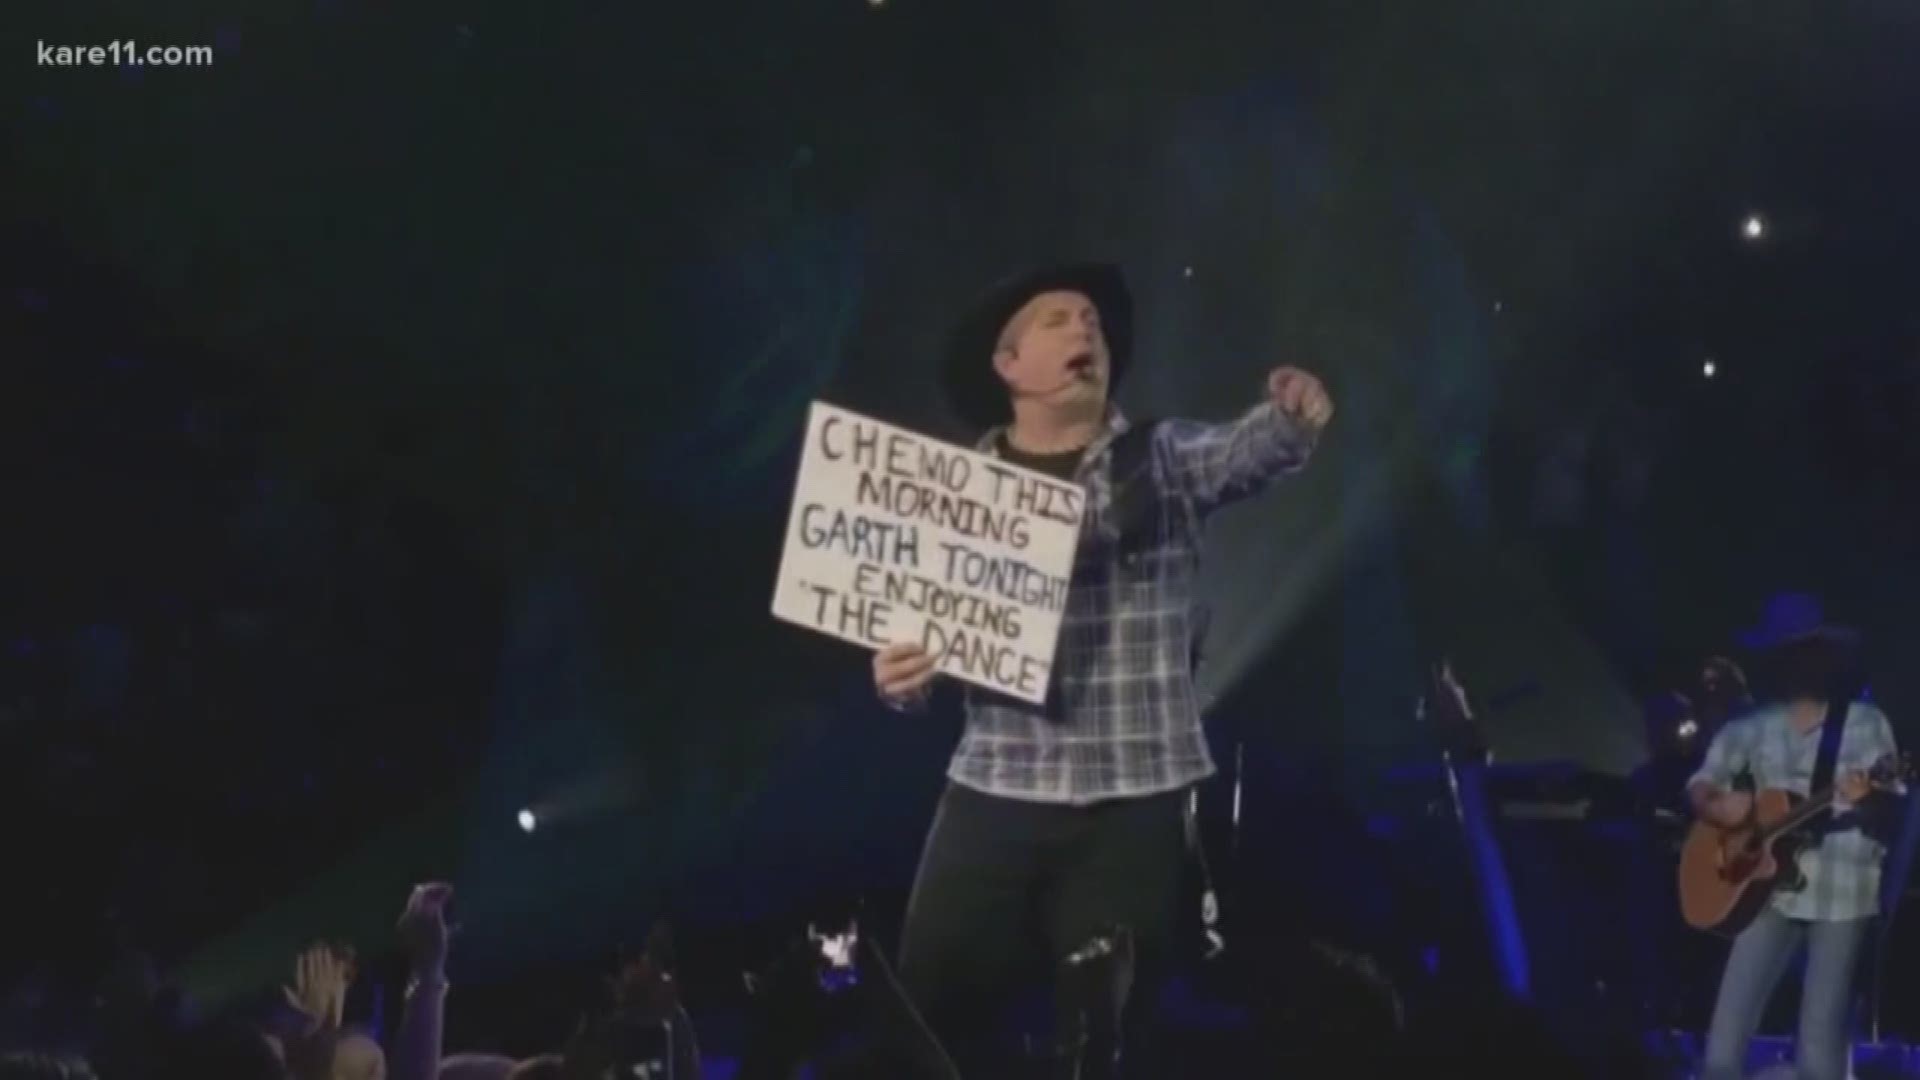 When Garth Brooks takes the stage for two sold-out concerts at U.S. Bank Stadium, both the artist and a certain fan will be remembering a moment from Brook’s last Twin Cities’ appearances.